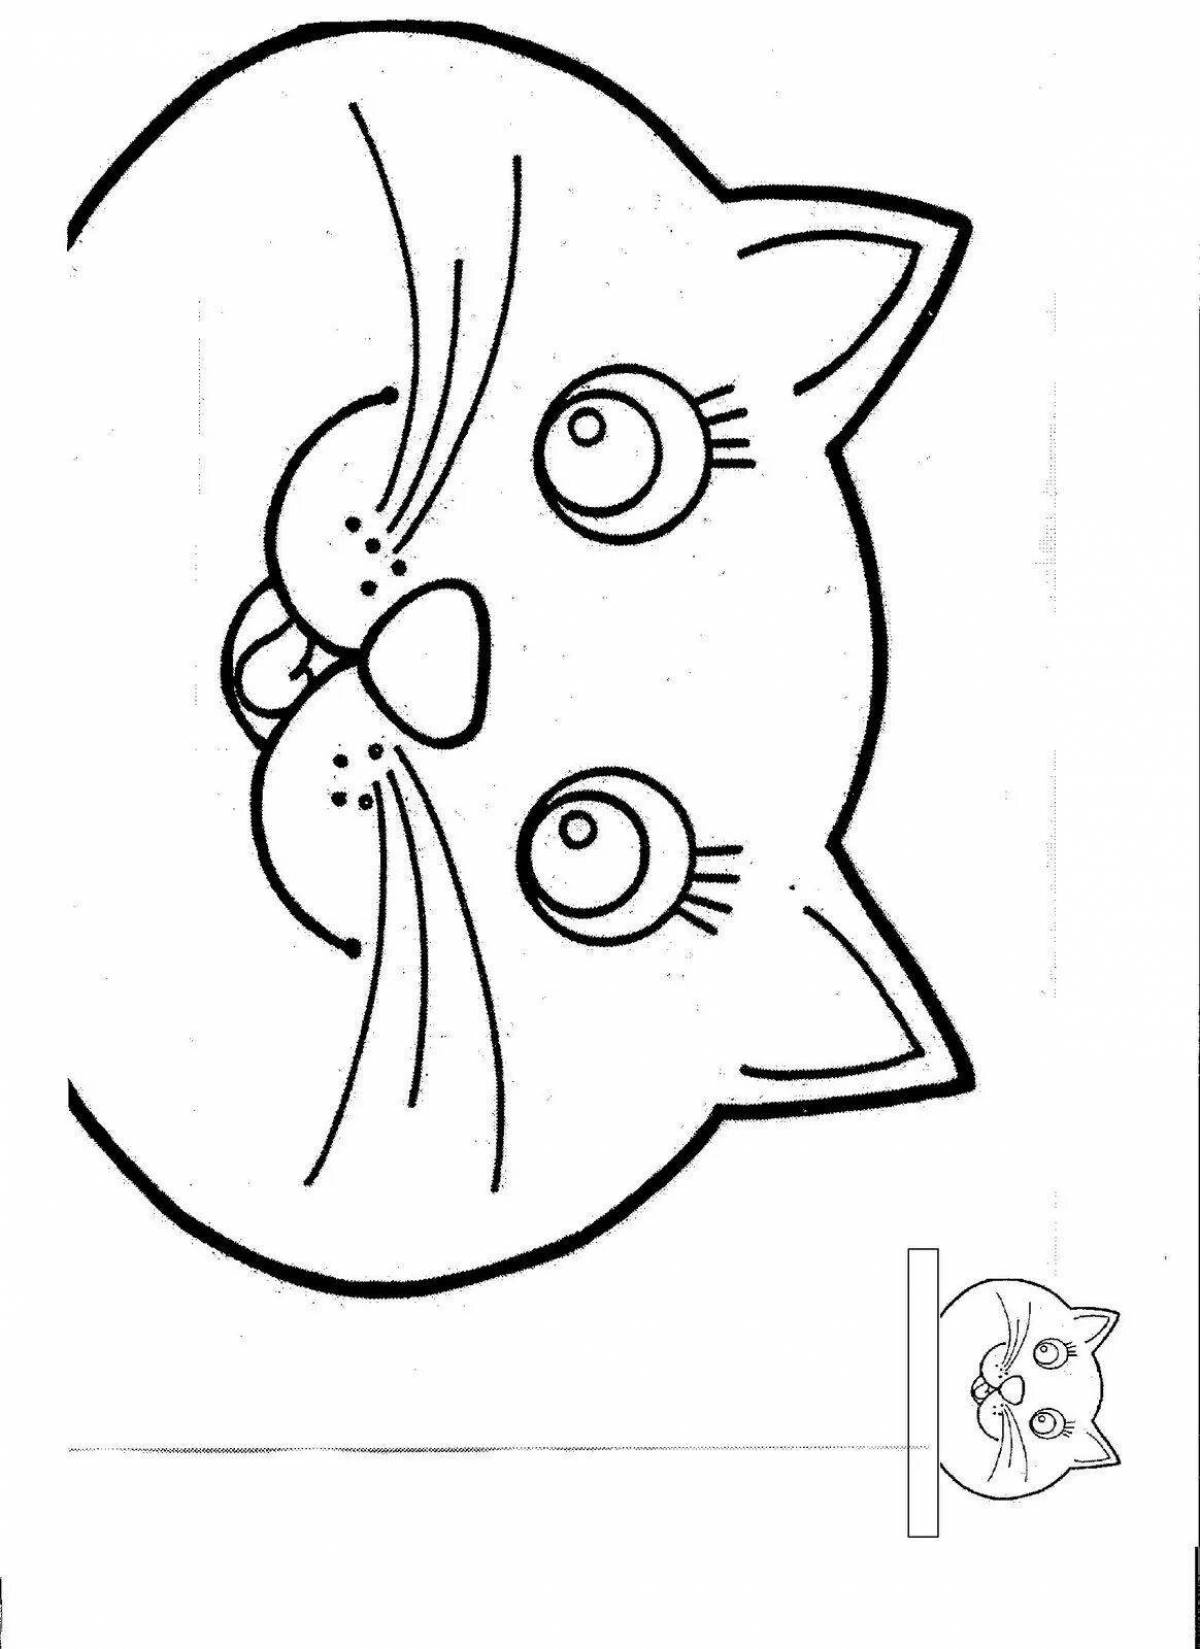 Live cat face coloring book